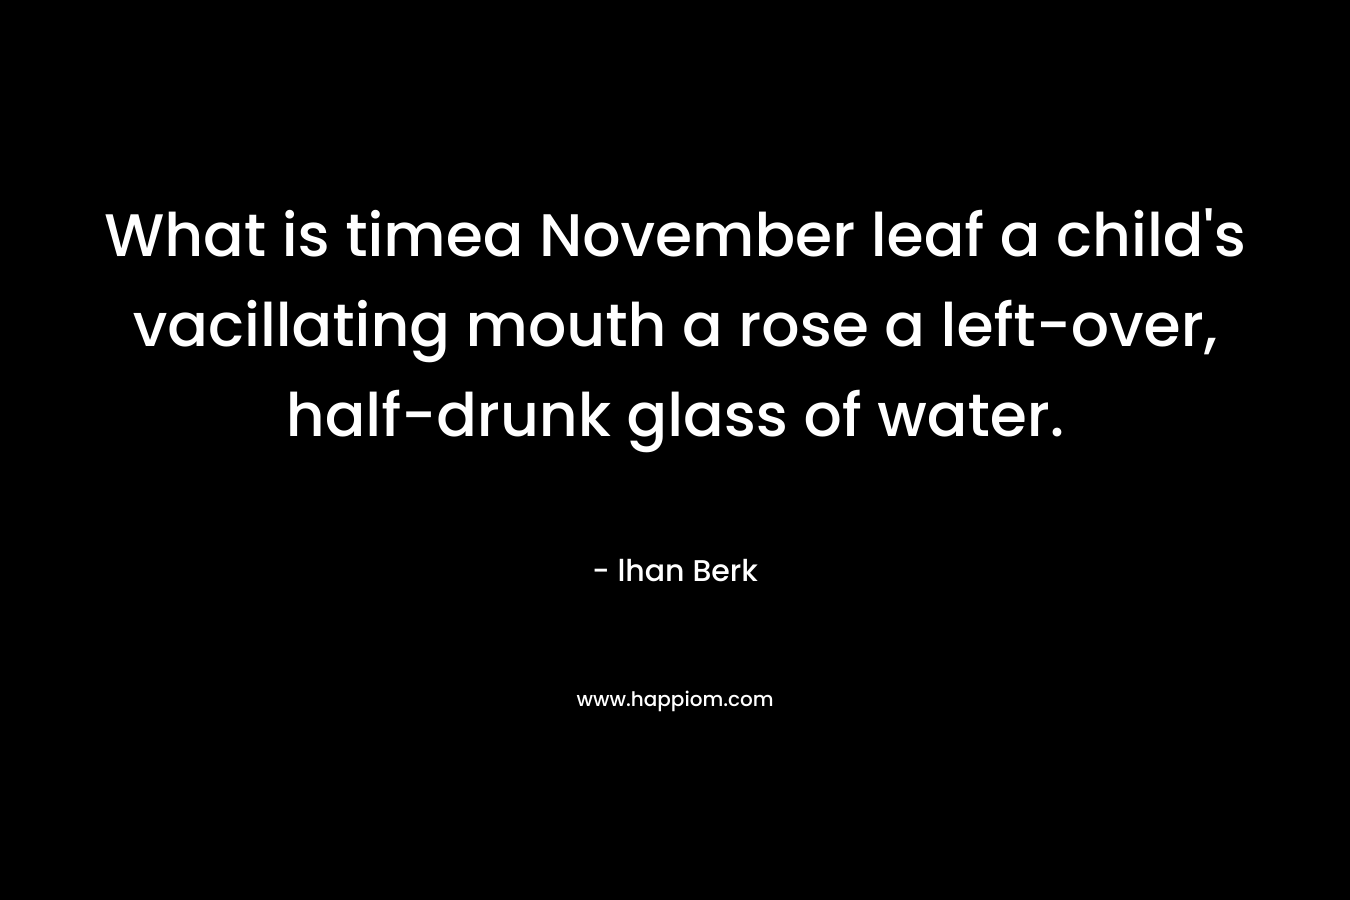 What is timea November leaf a child’s vacillating mouth a rose a left-over, half-drunk glass of water. – lhan Berk